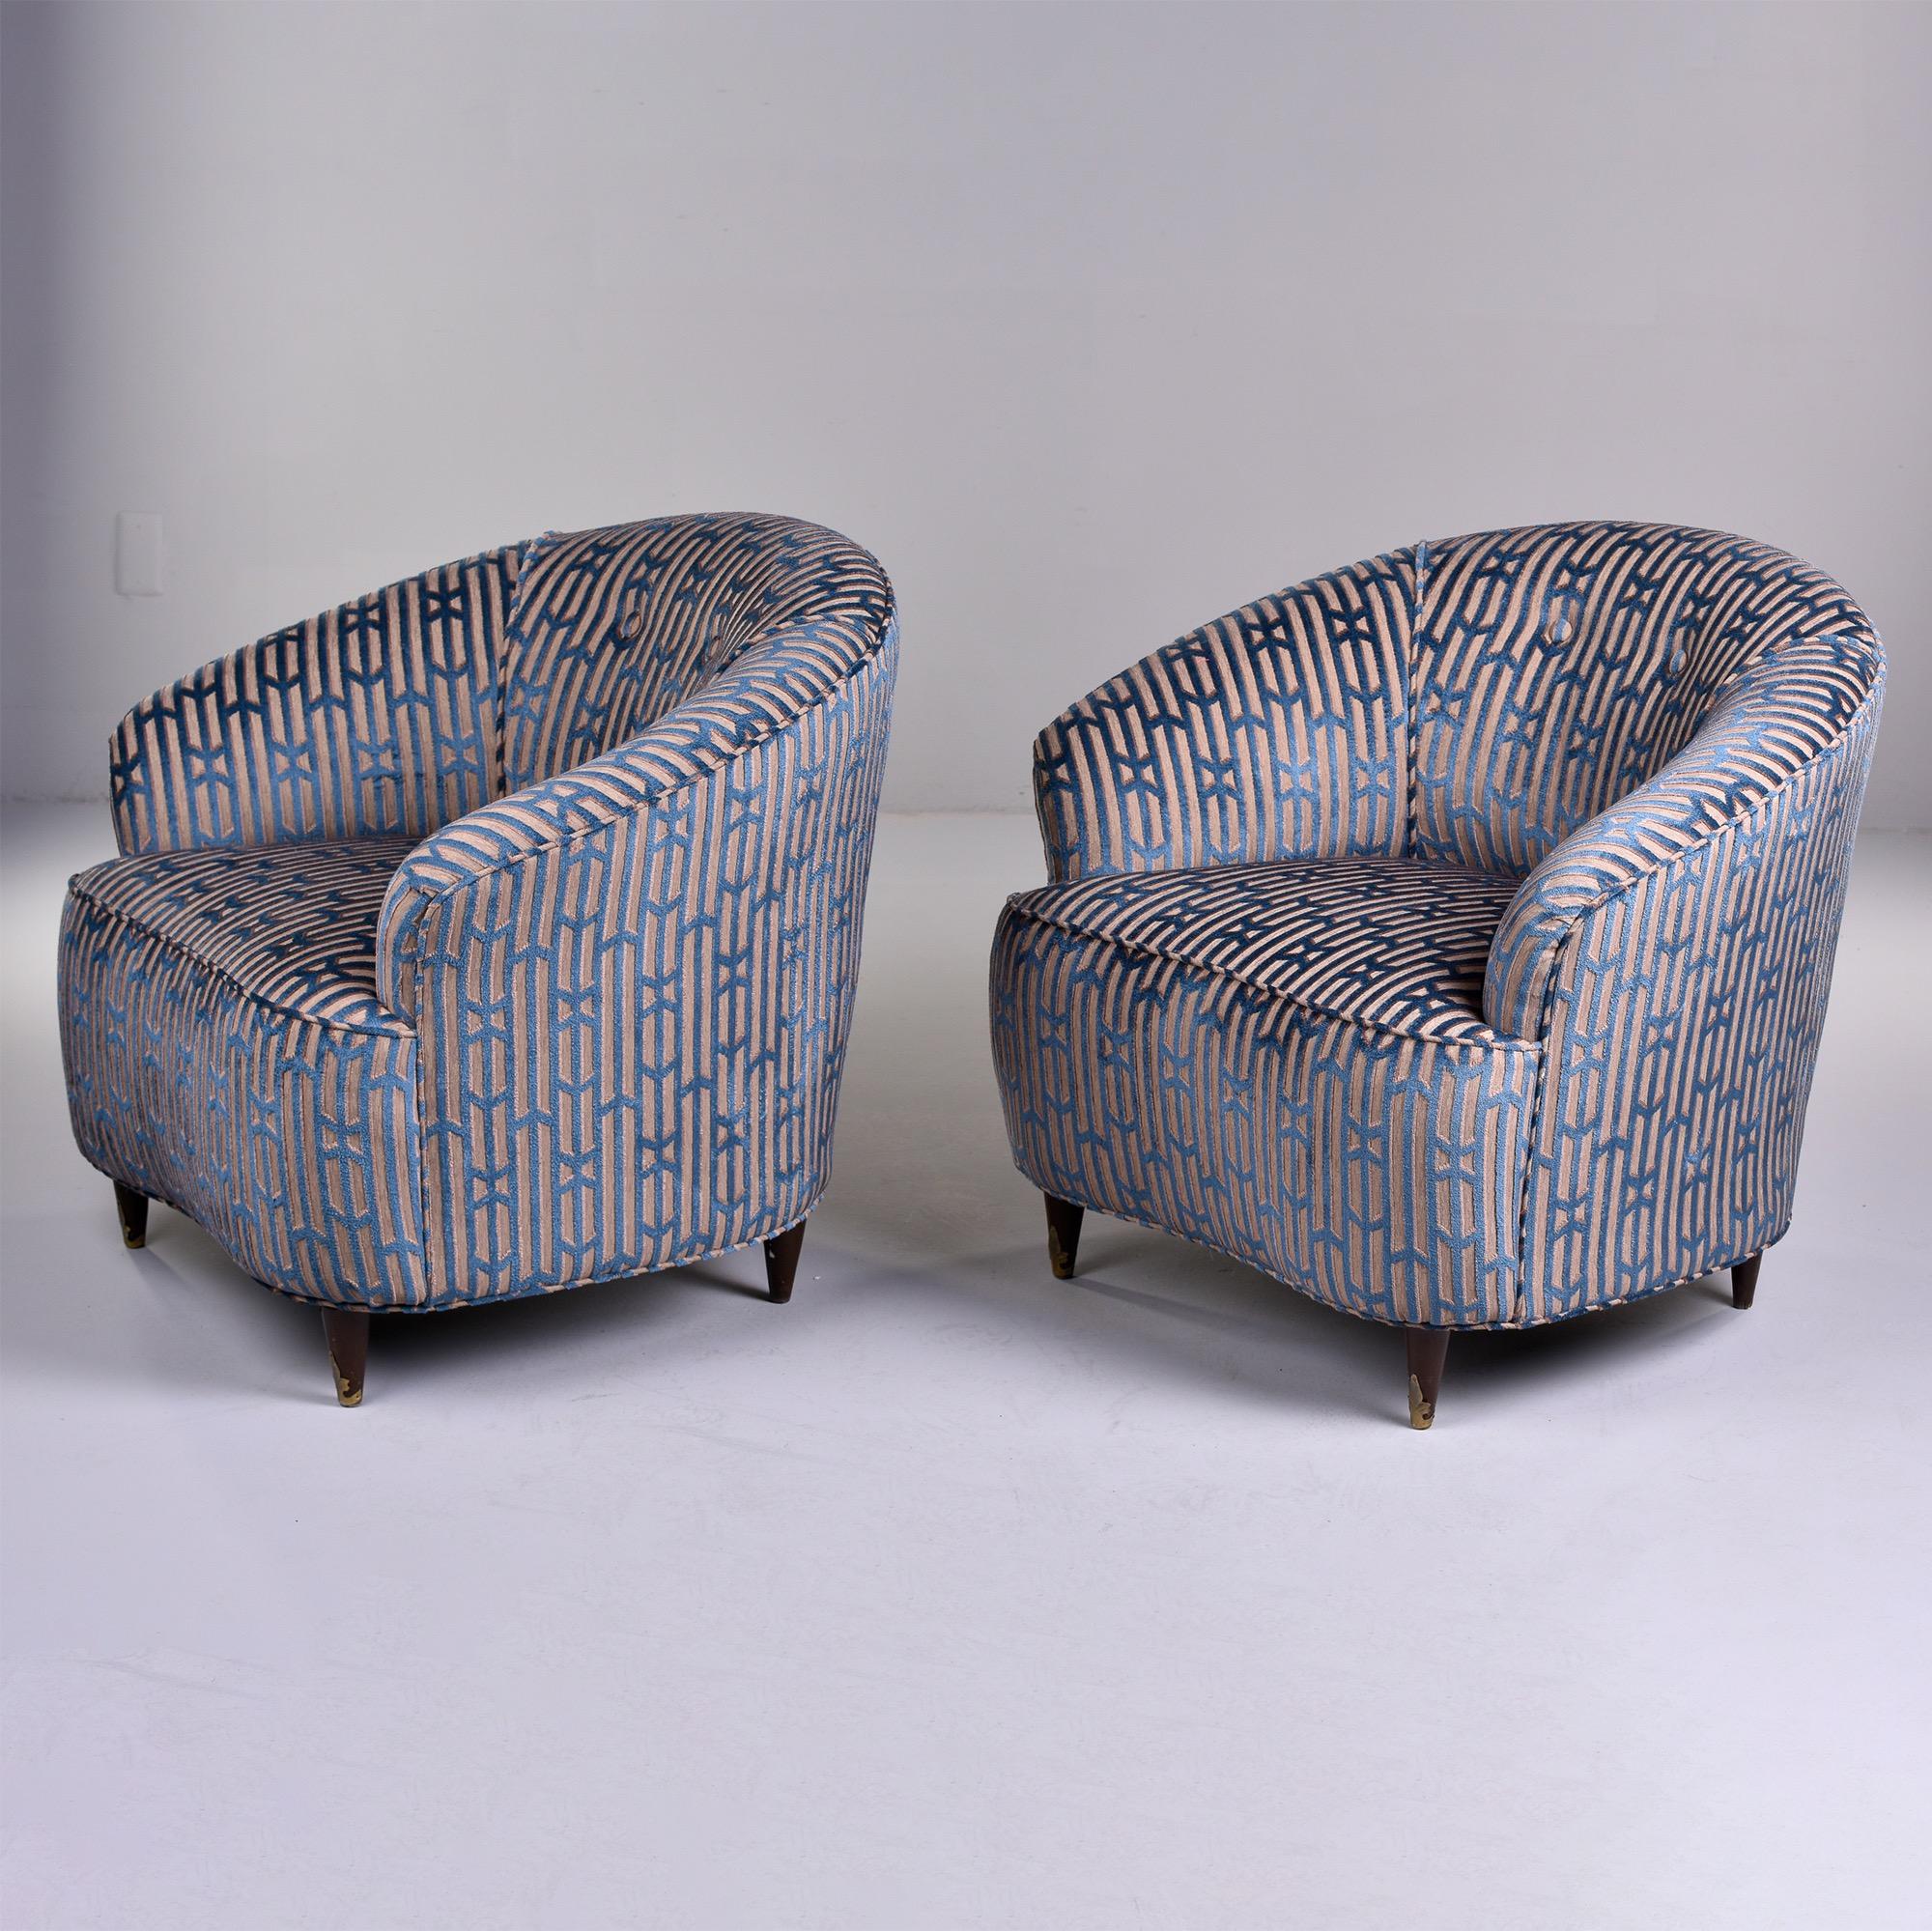 20th Century Pair of Mid Century Italian Tub Chairs with New Upholstery